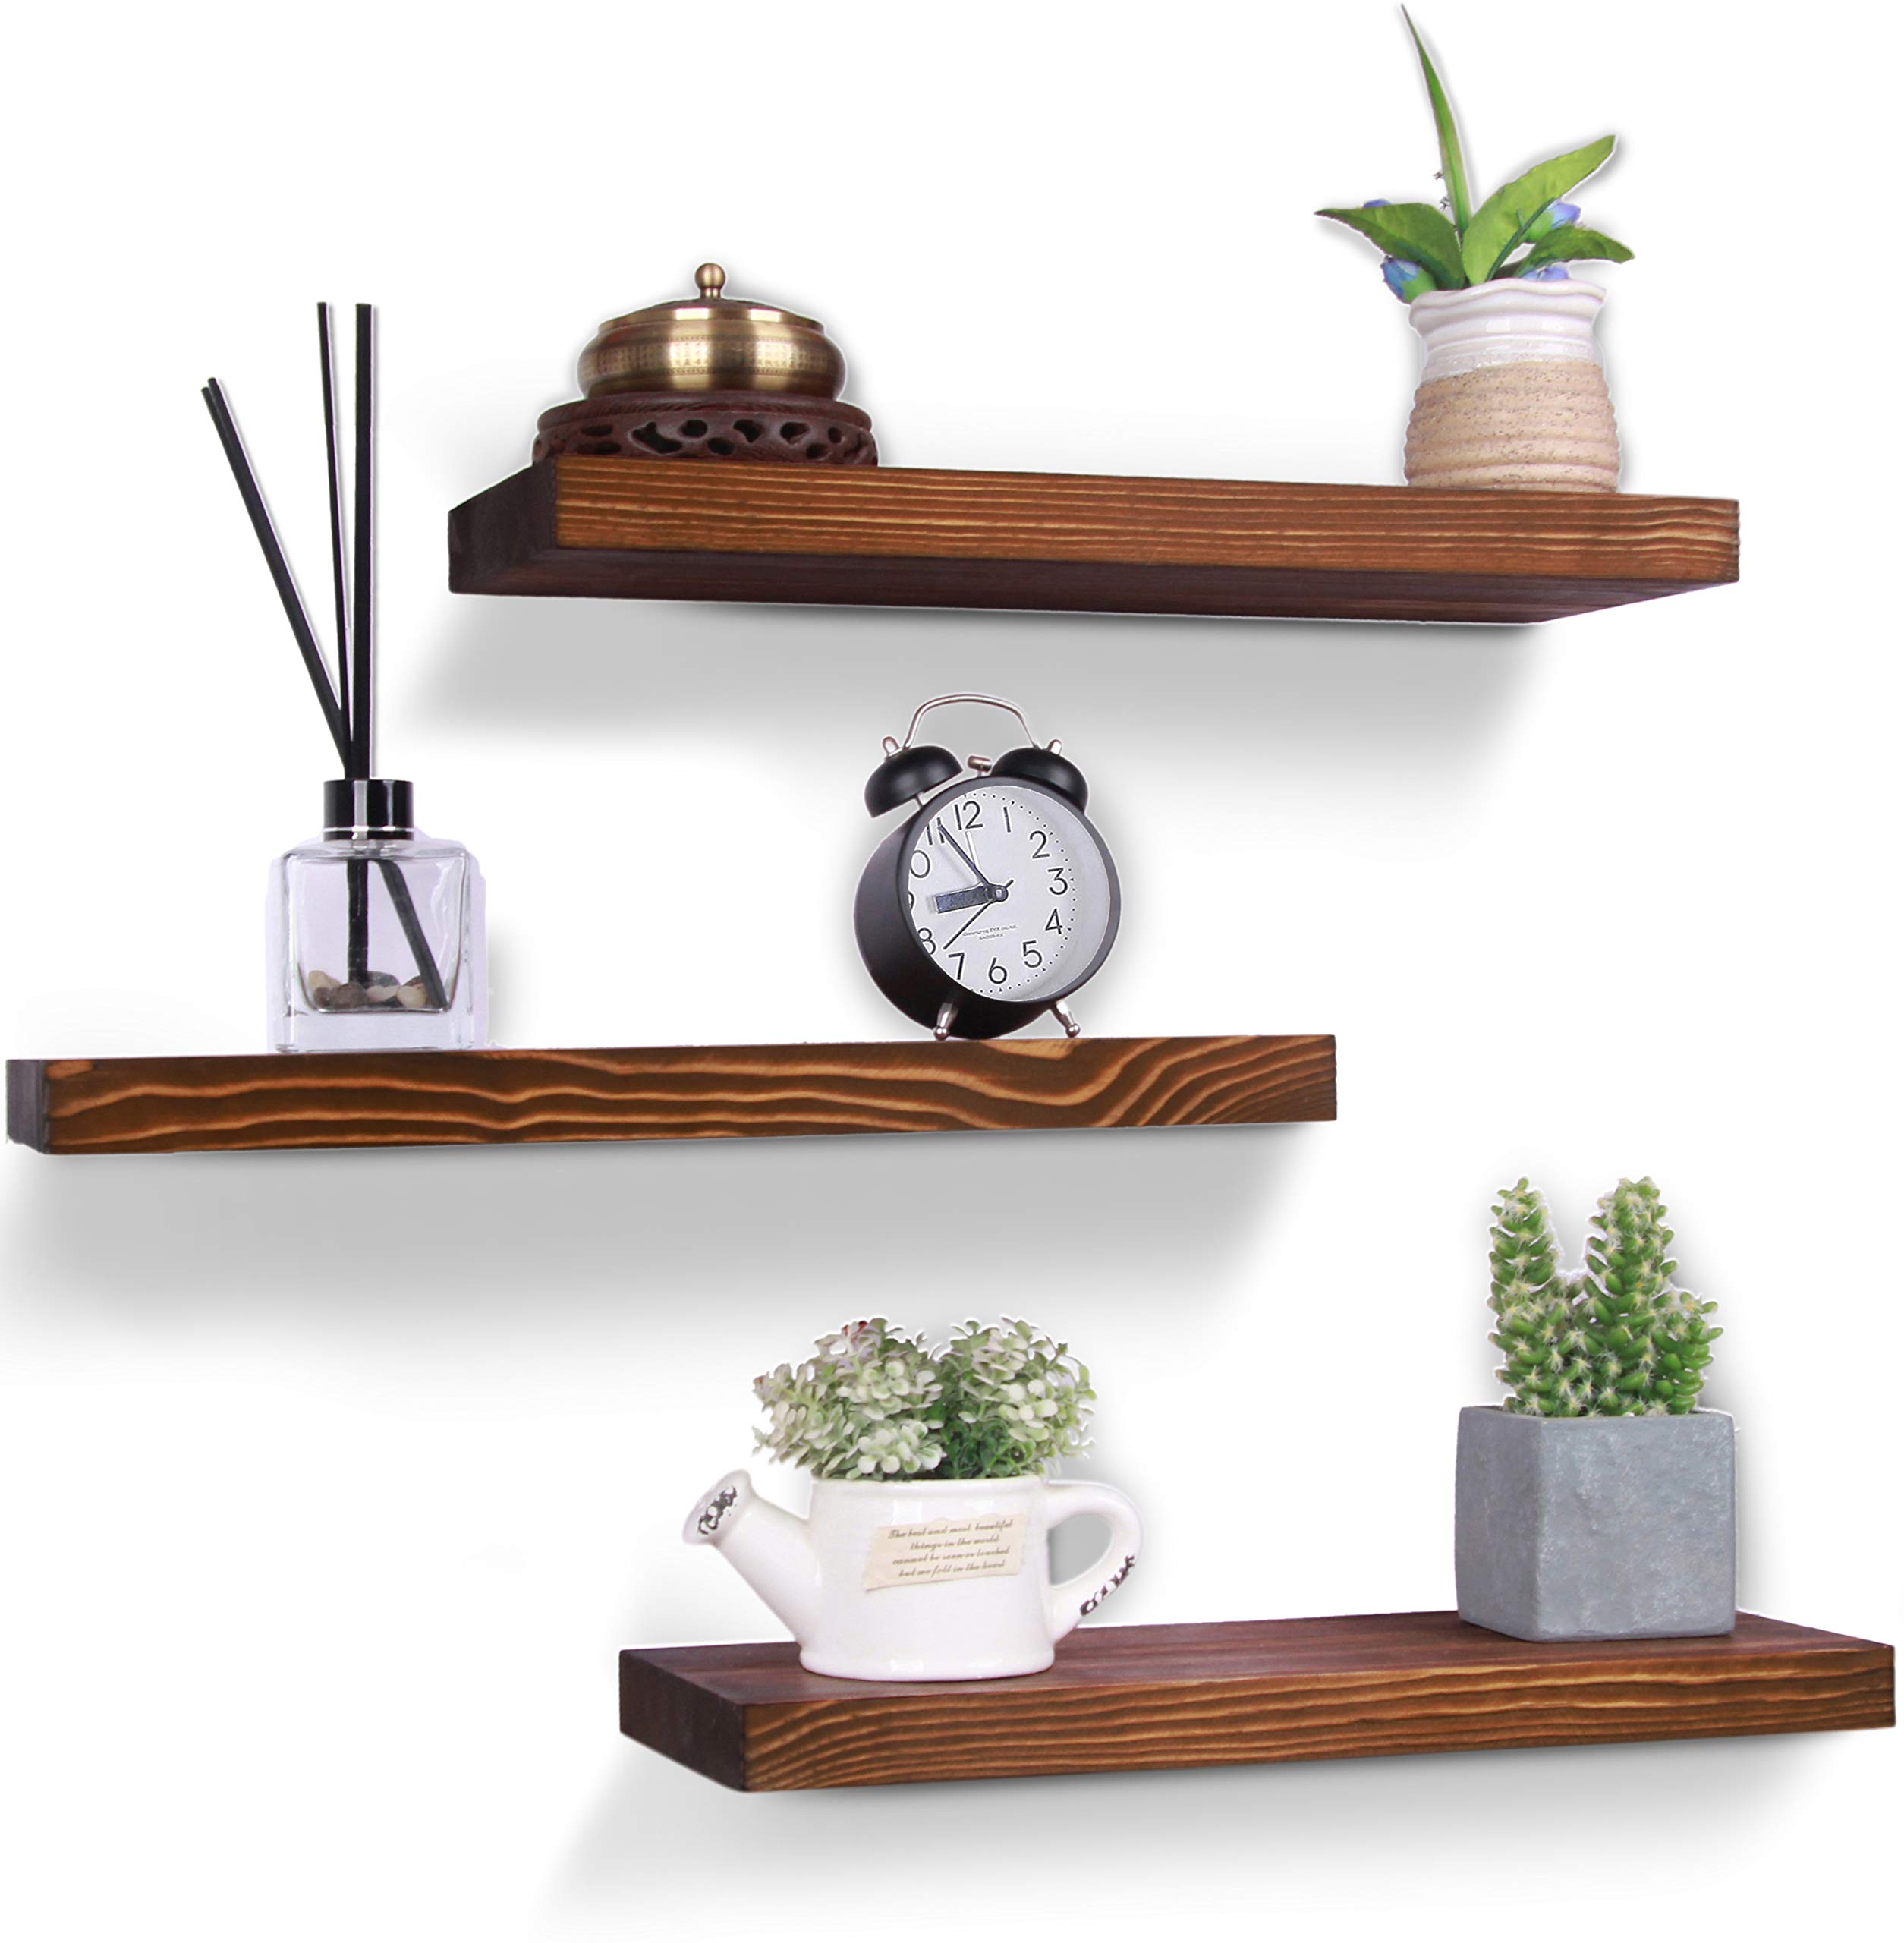 HXSWY Rustic Wood Floating Shelves Farmhouse Wooden Wall Shelves